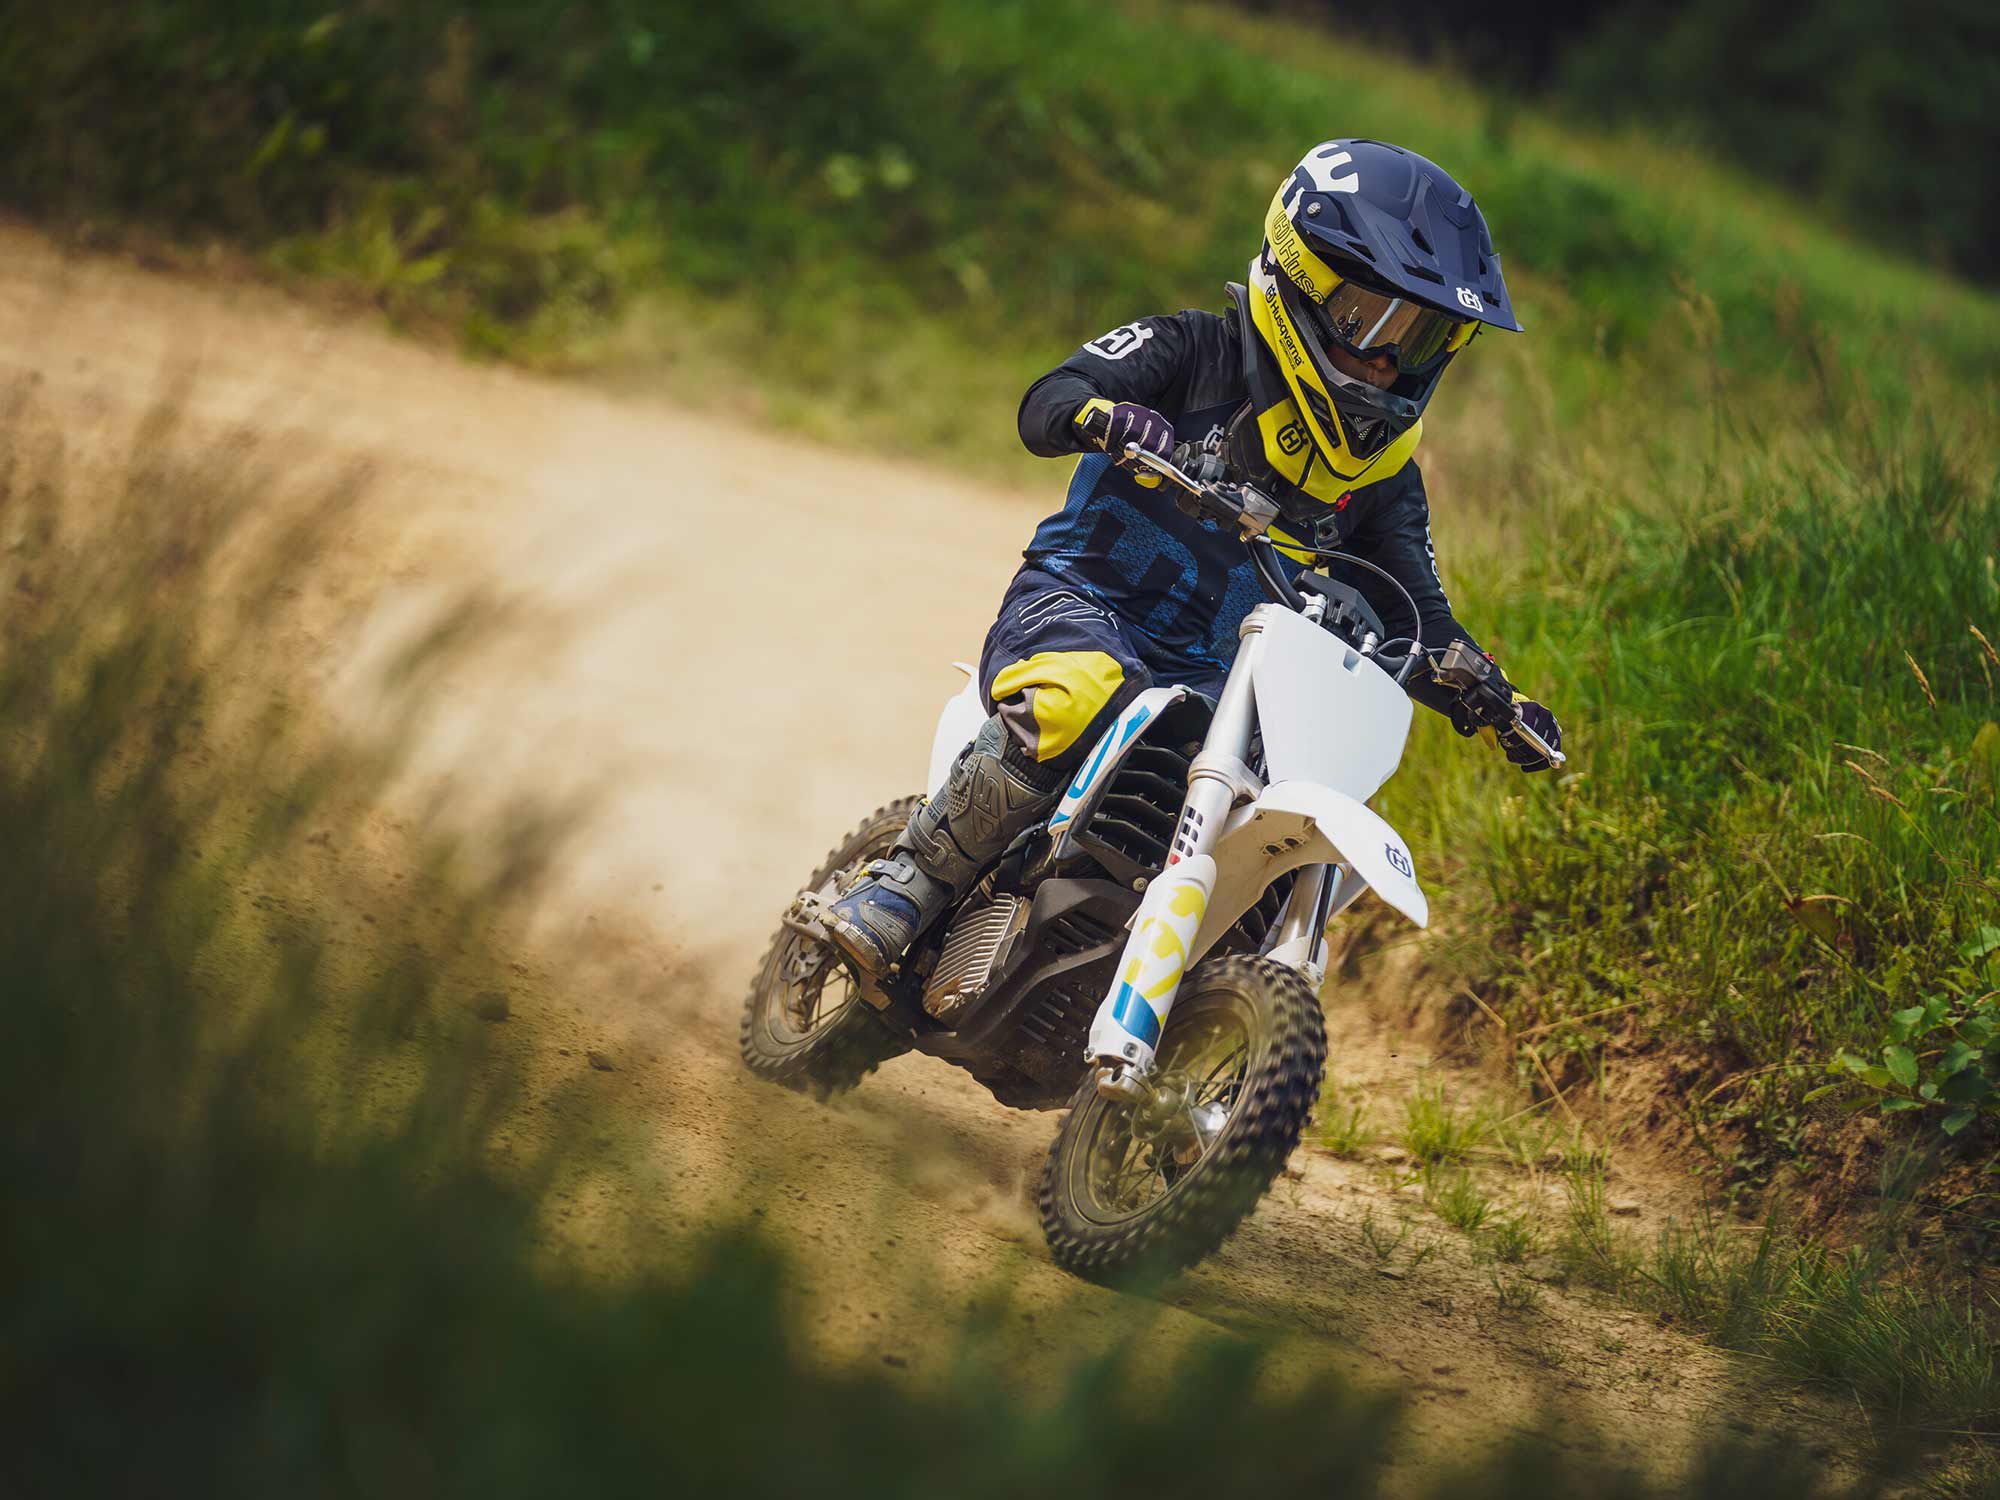 With a number of safety features, the EE 3 lets parents keep power output restricted until junior learns the ropes.